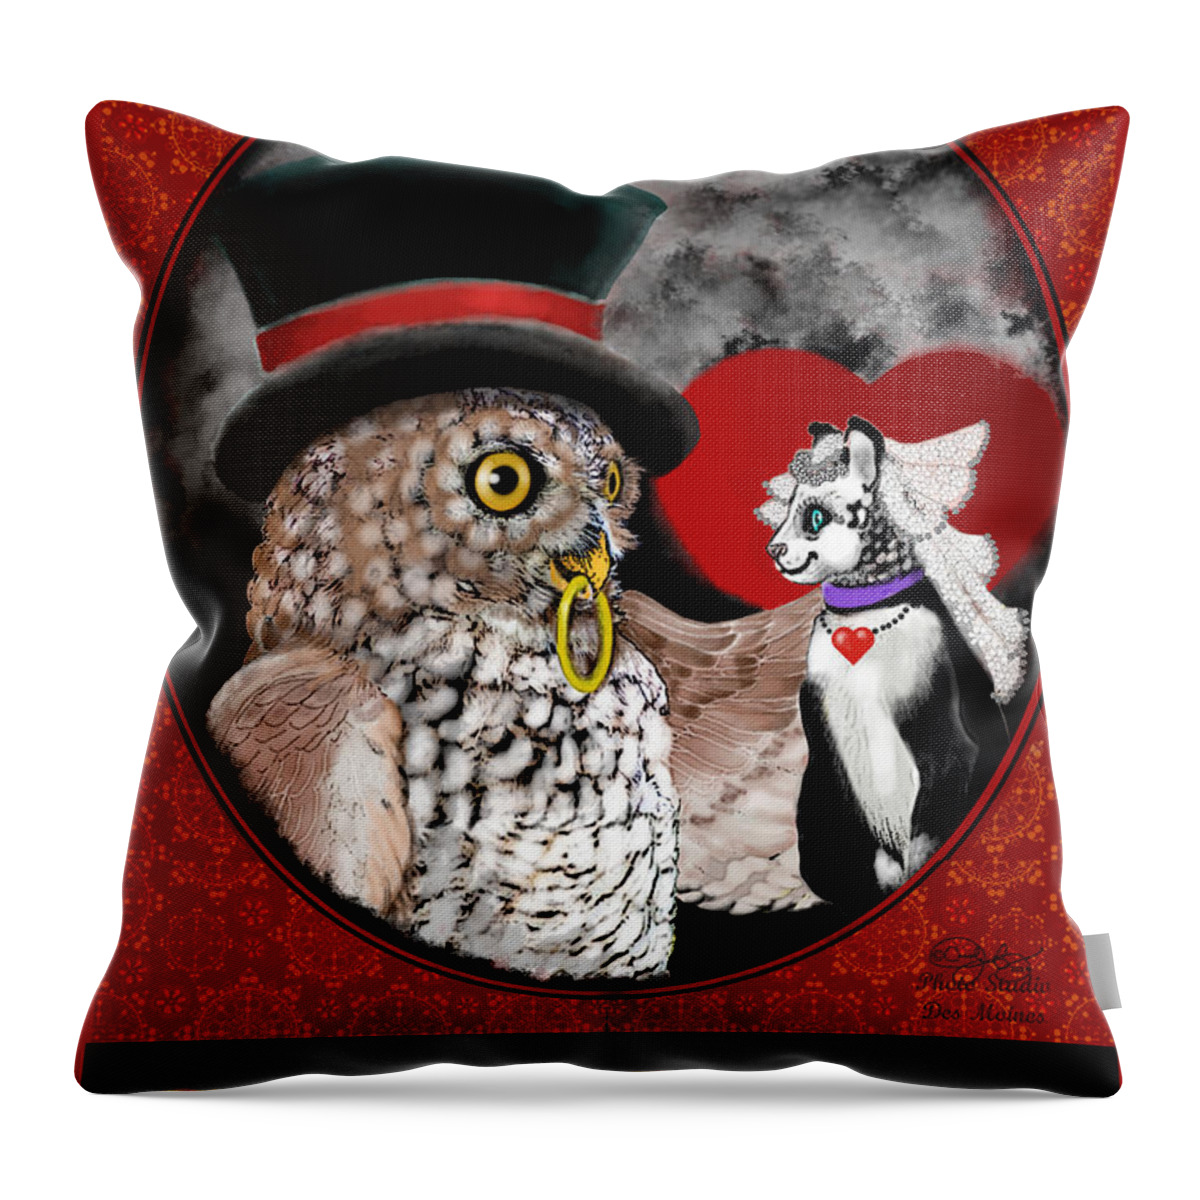 Sweethearts Throw Pillow featuring the digital art Sweet Sweethearts by Carol Jacobs